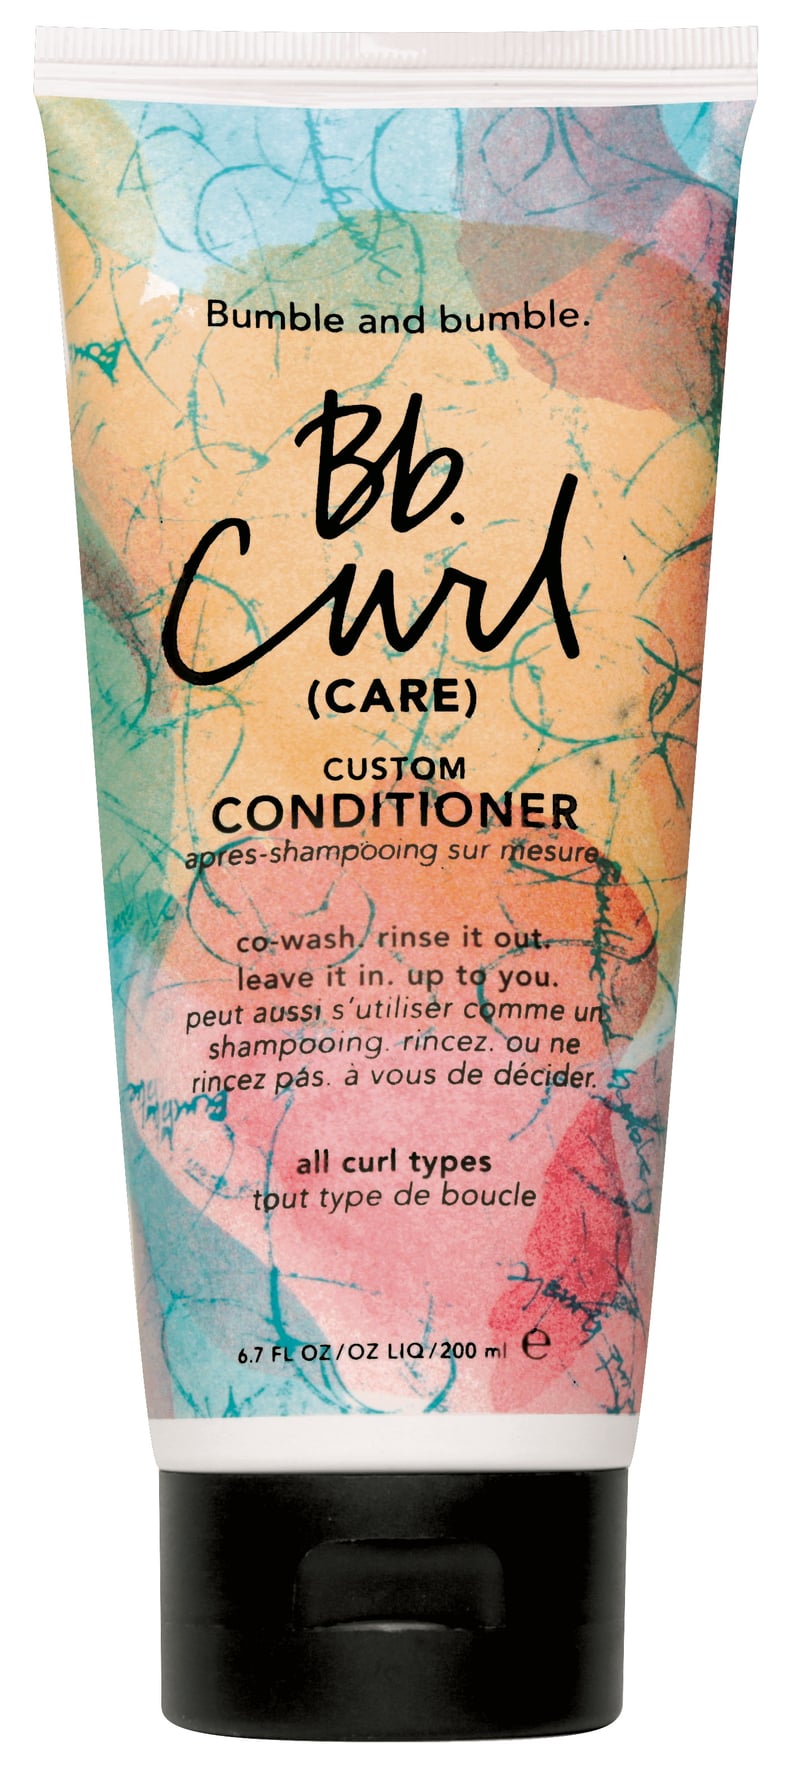 Bumble and Bumble Curl (Care) Custom Conditioner